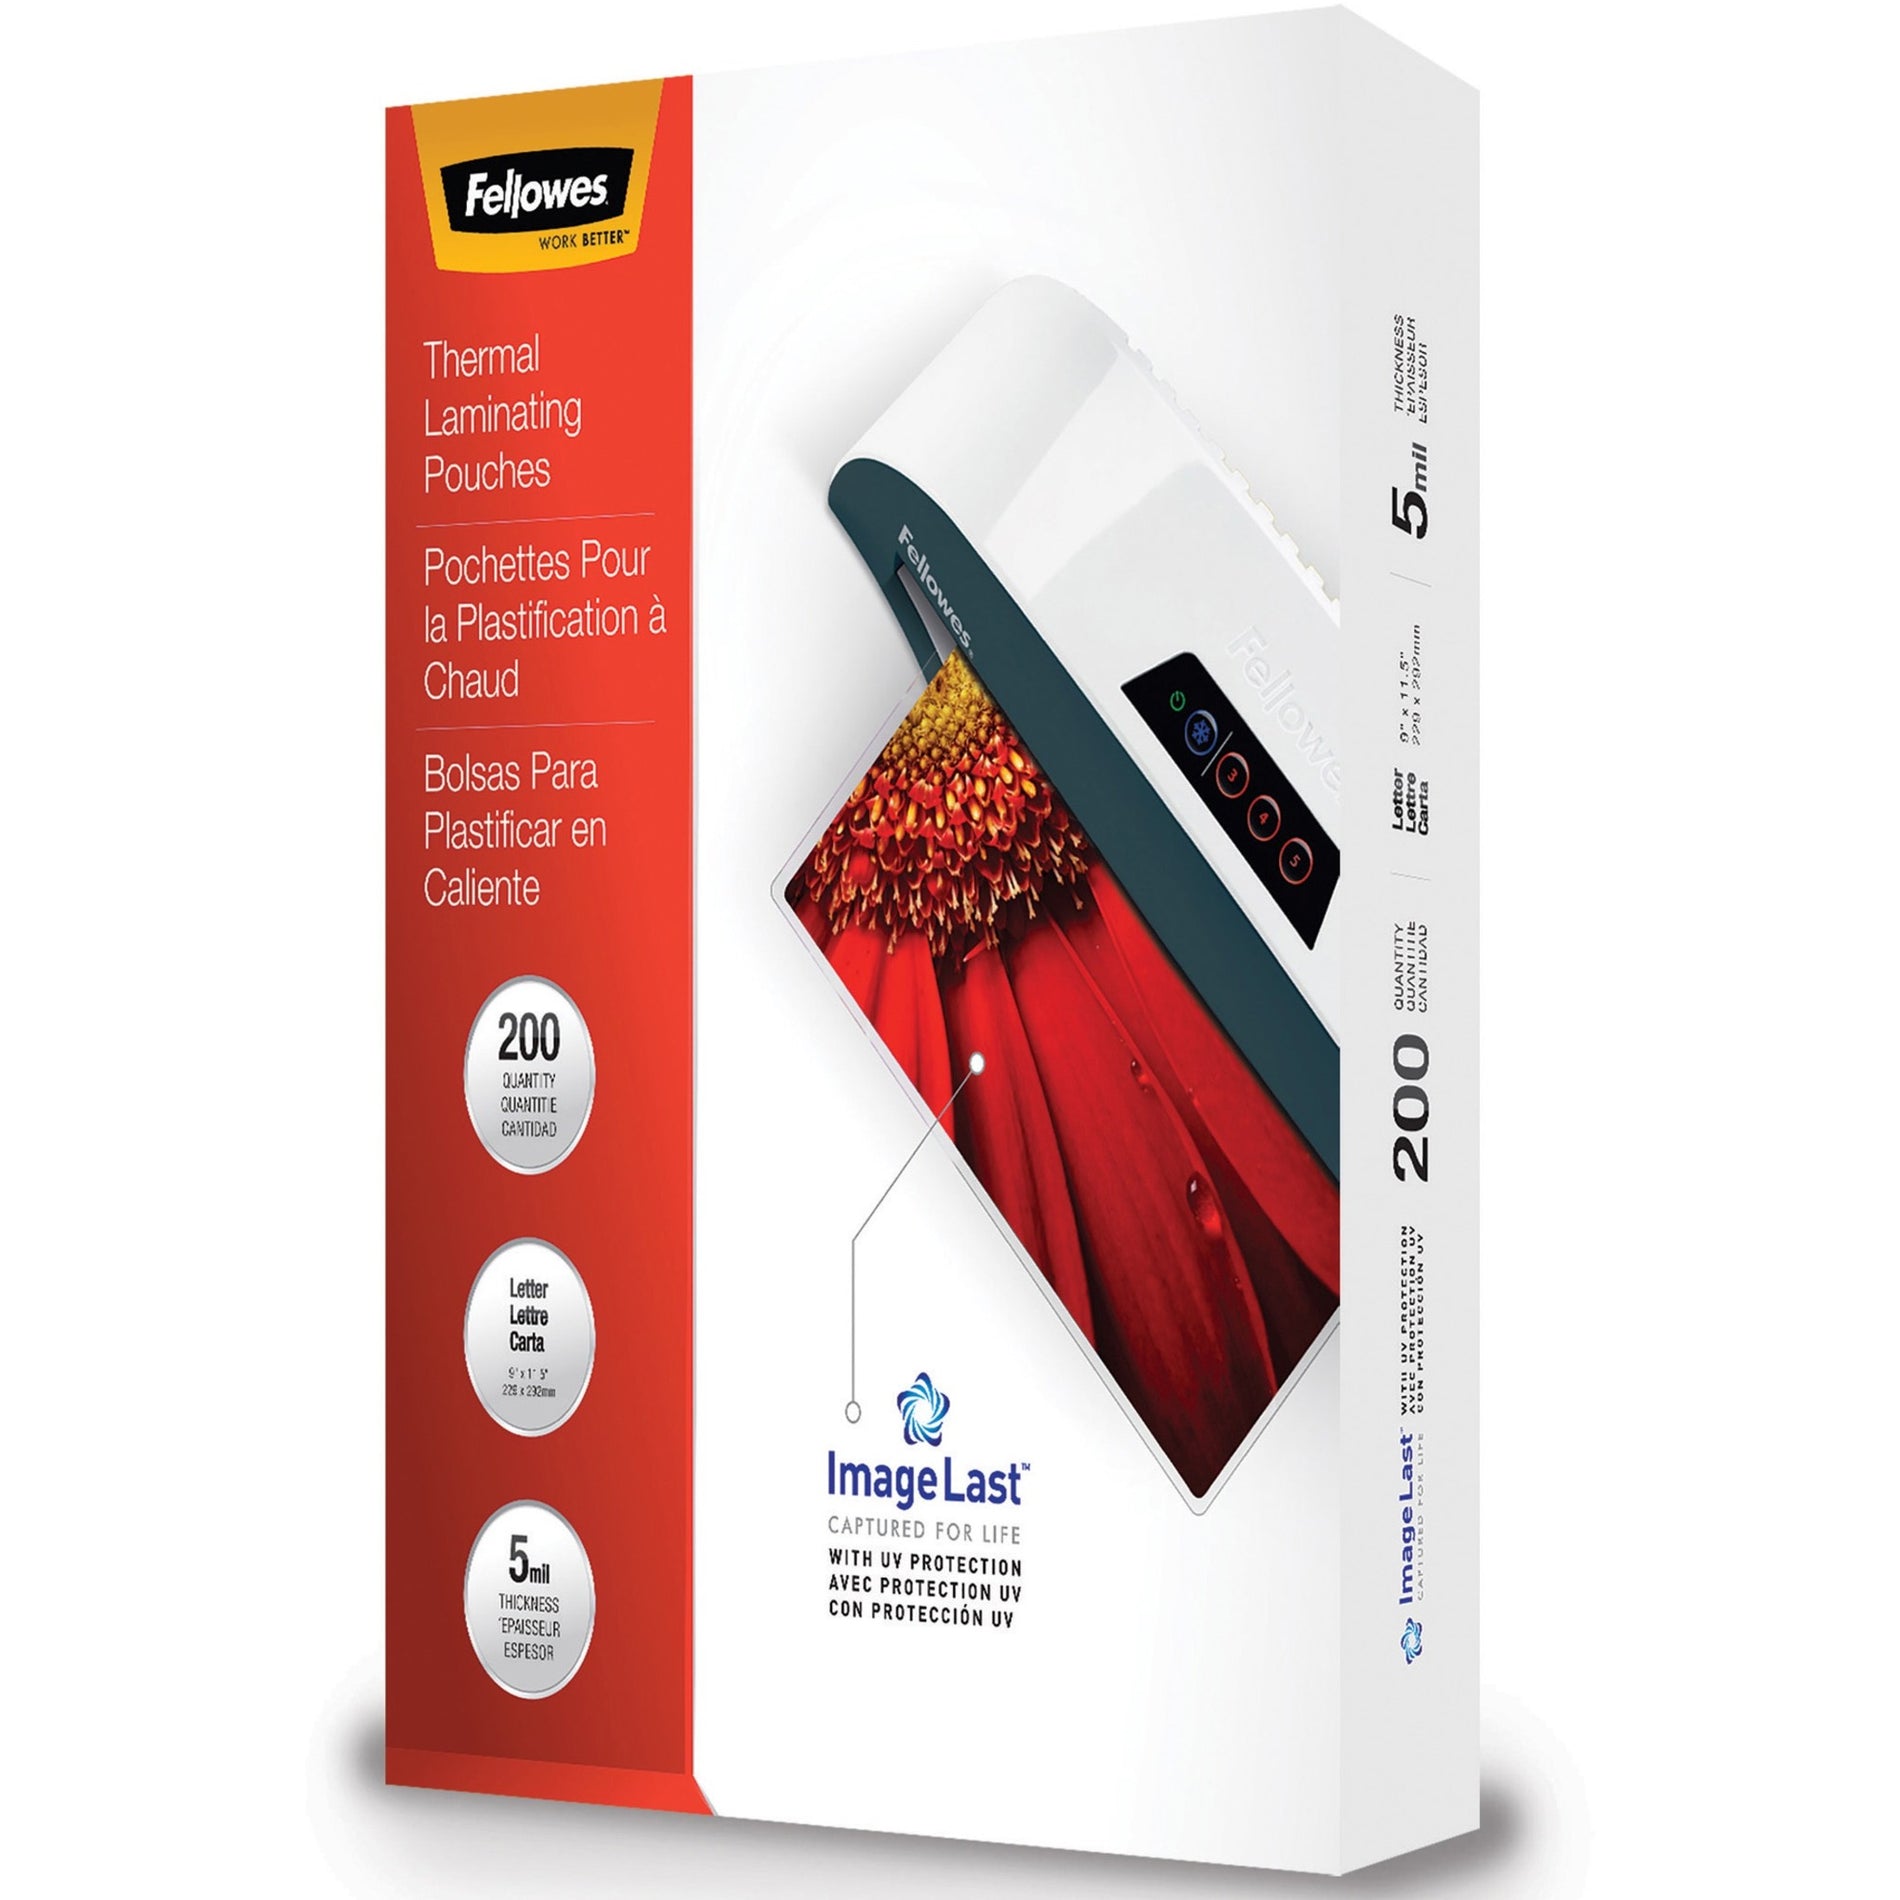 Fellowes Thermal Laminating Pouches - ImageLast&trade;, Jam Free, Letter, 5mil, 200 pack (5245301) Main image